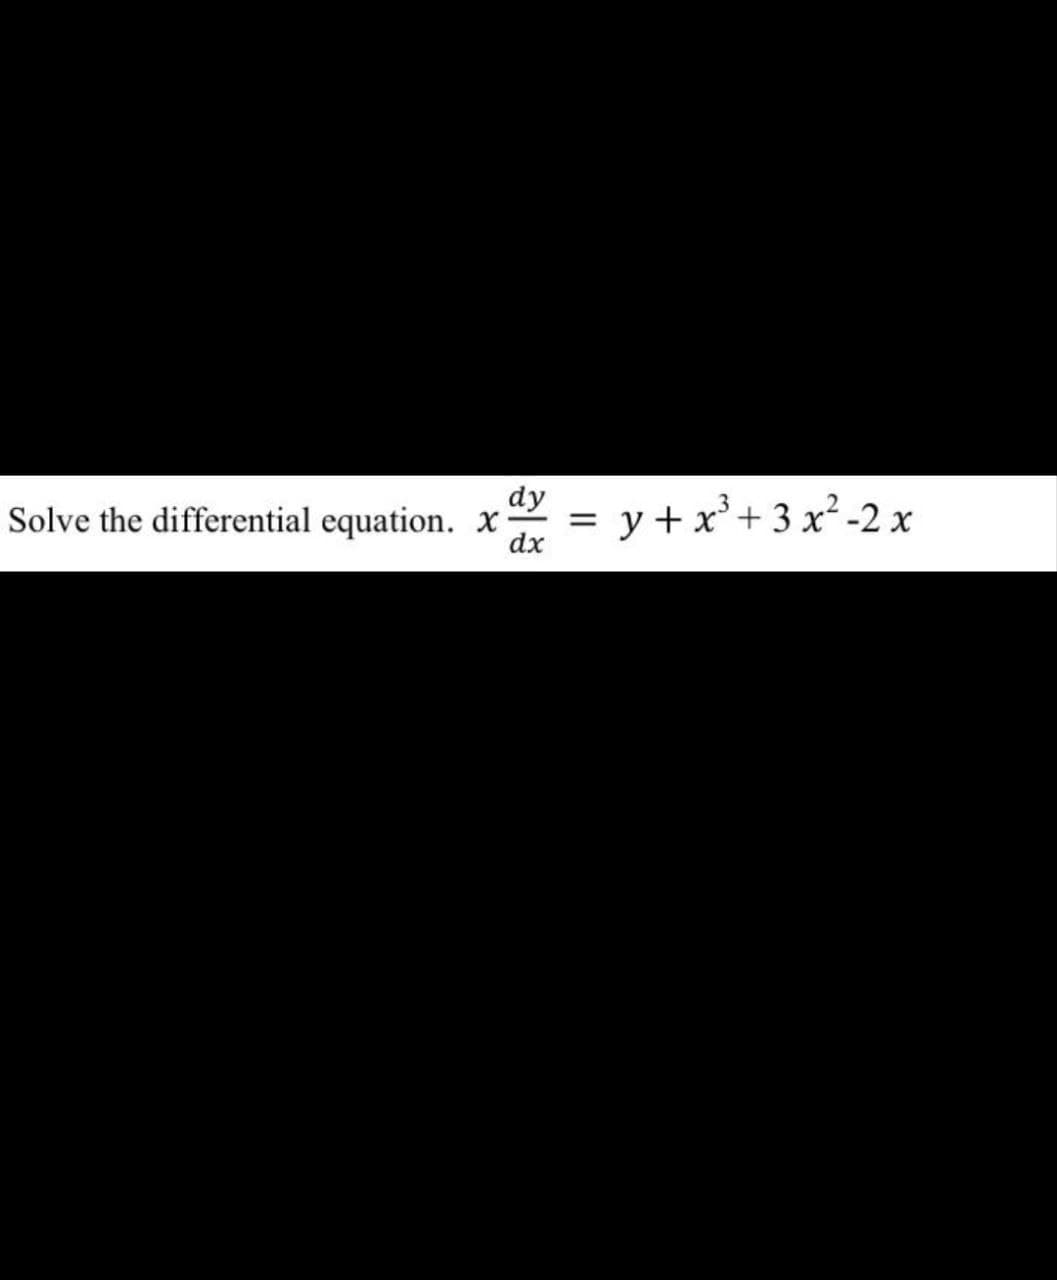 dy
Solve the differential equation. X
-
dx
= y + x³ + 3x² -2x